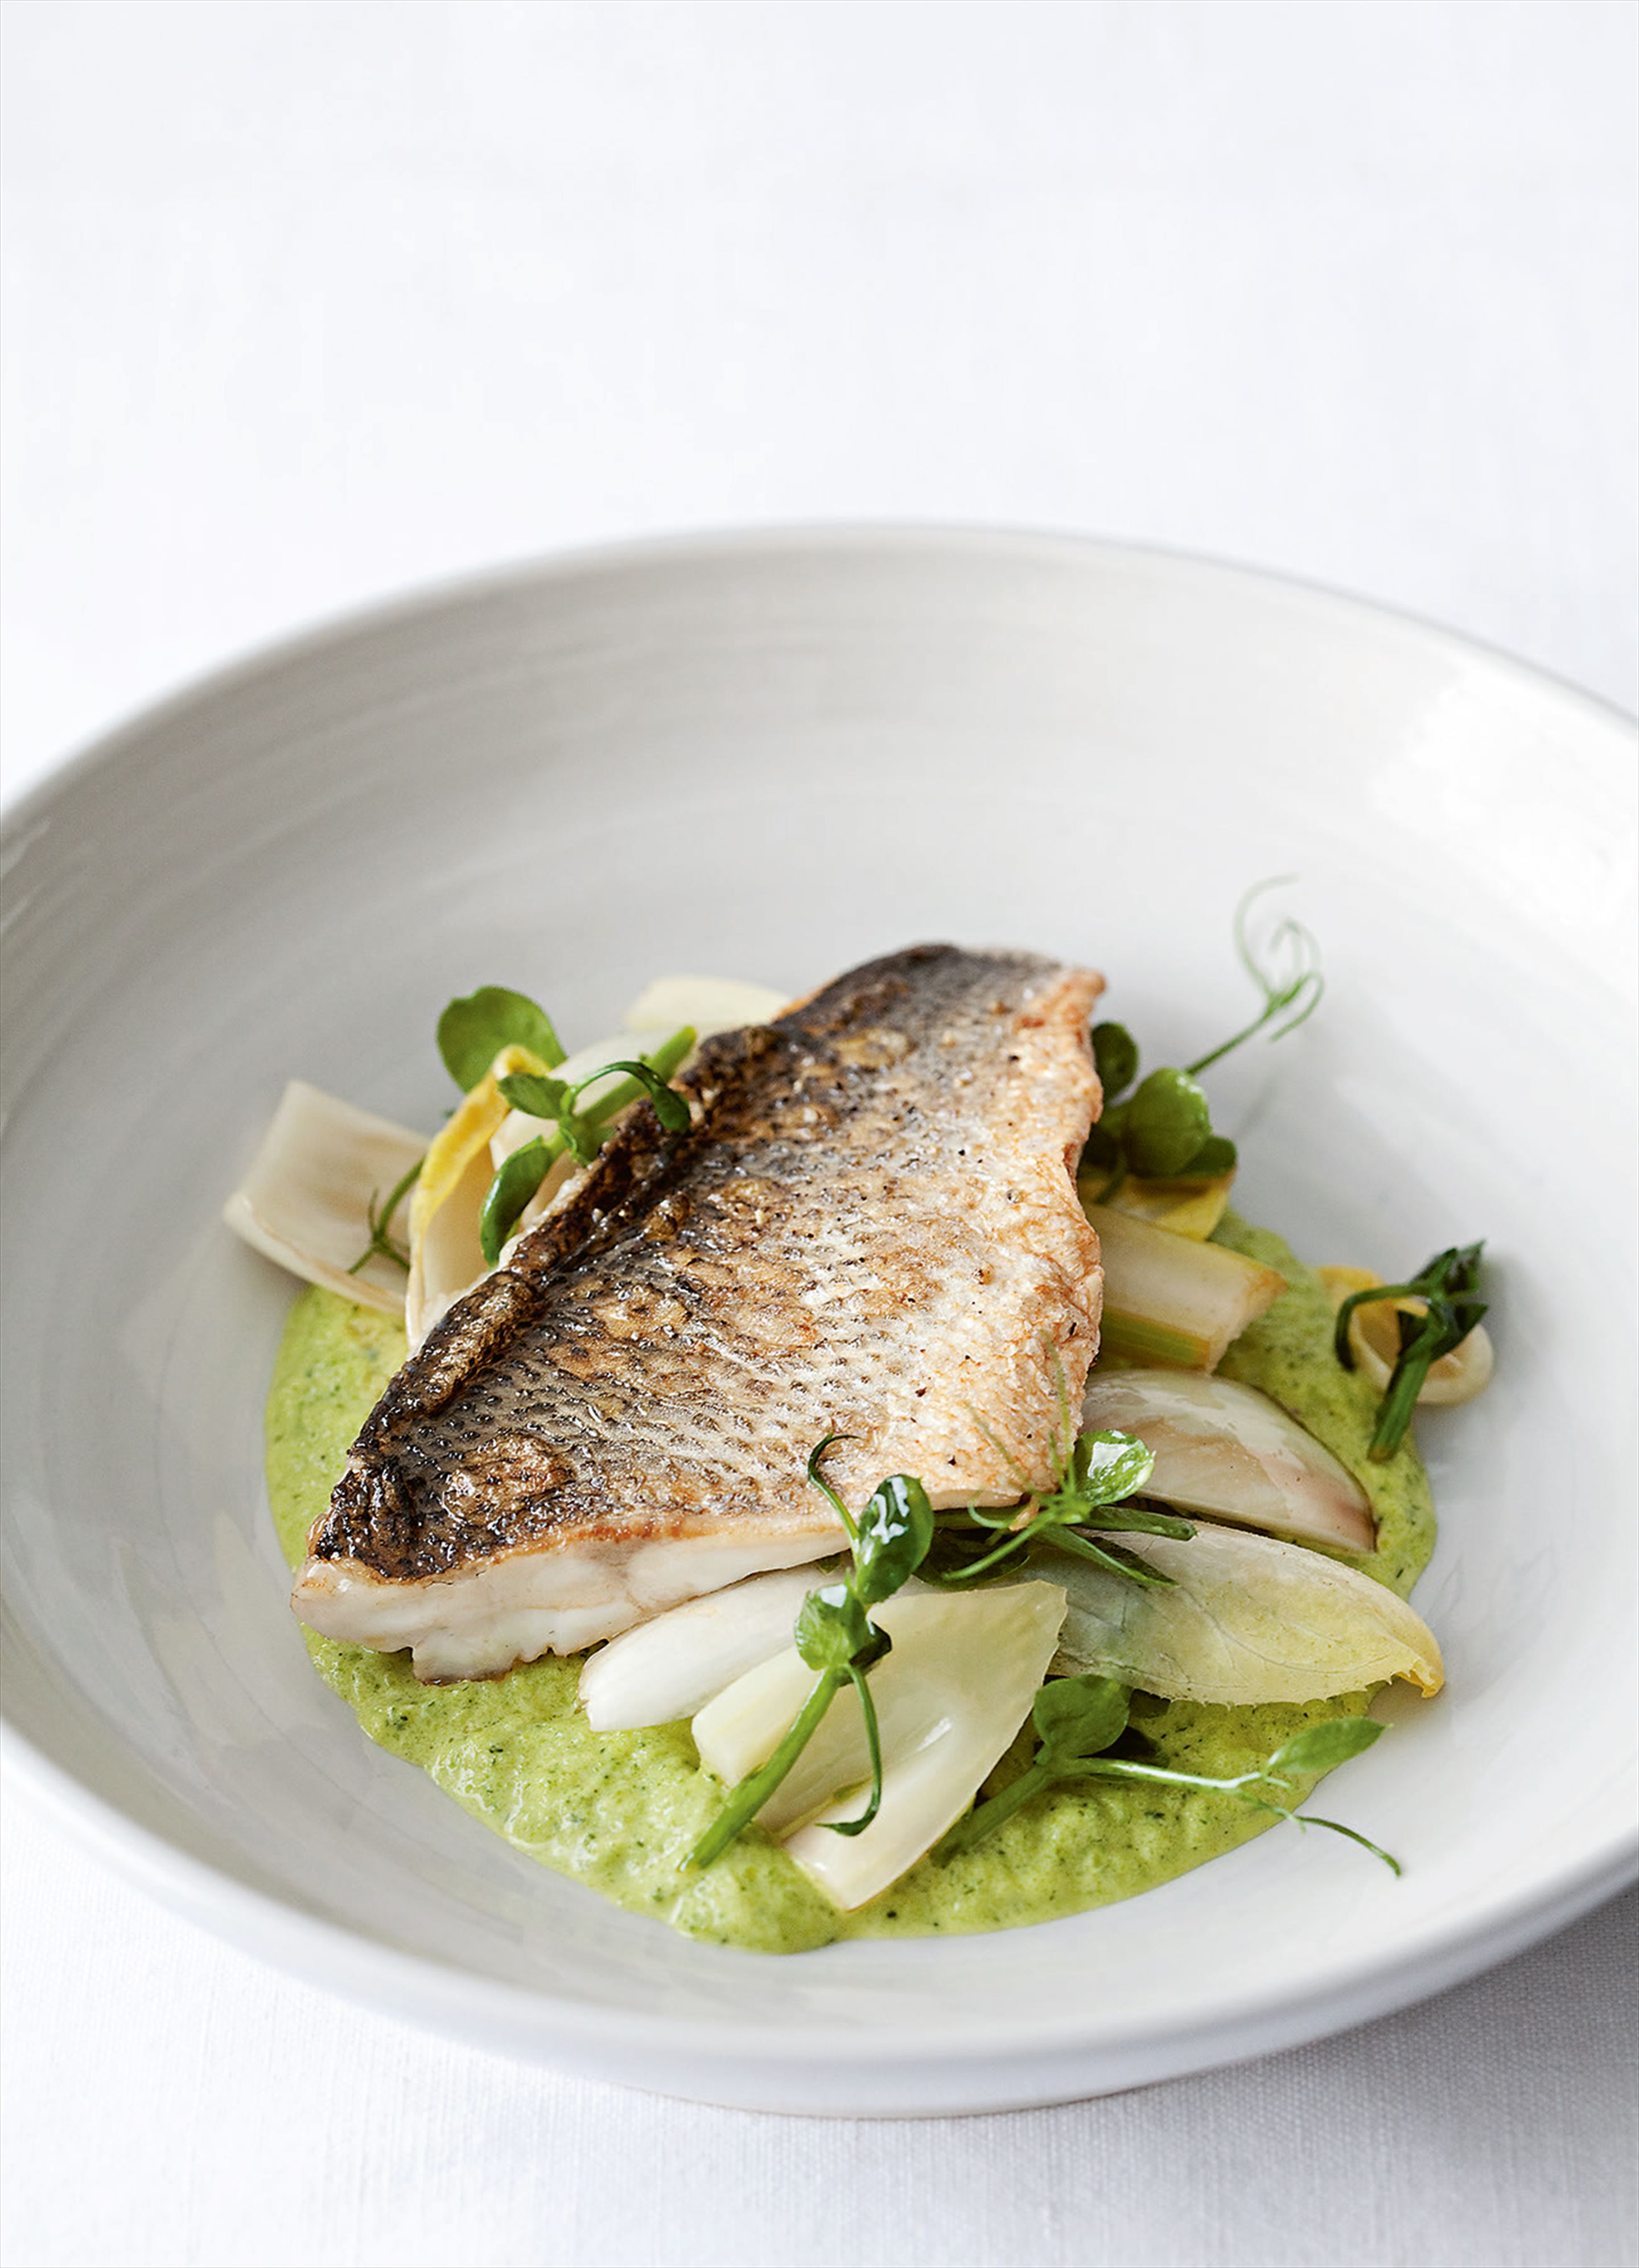 Sea bass with courgette sauce